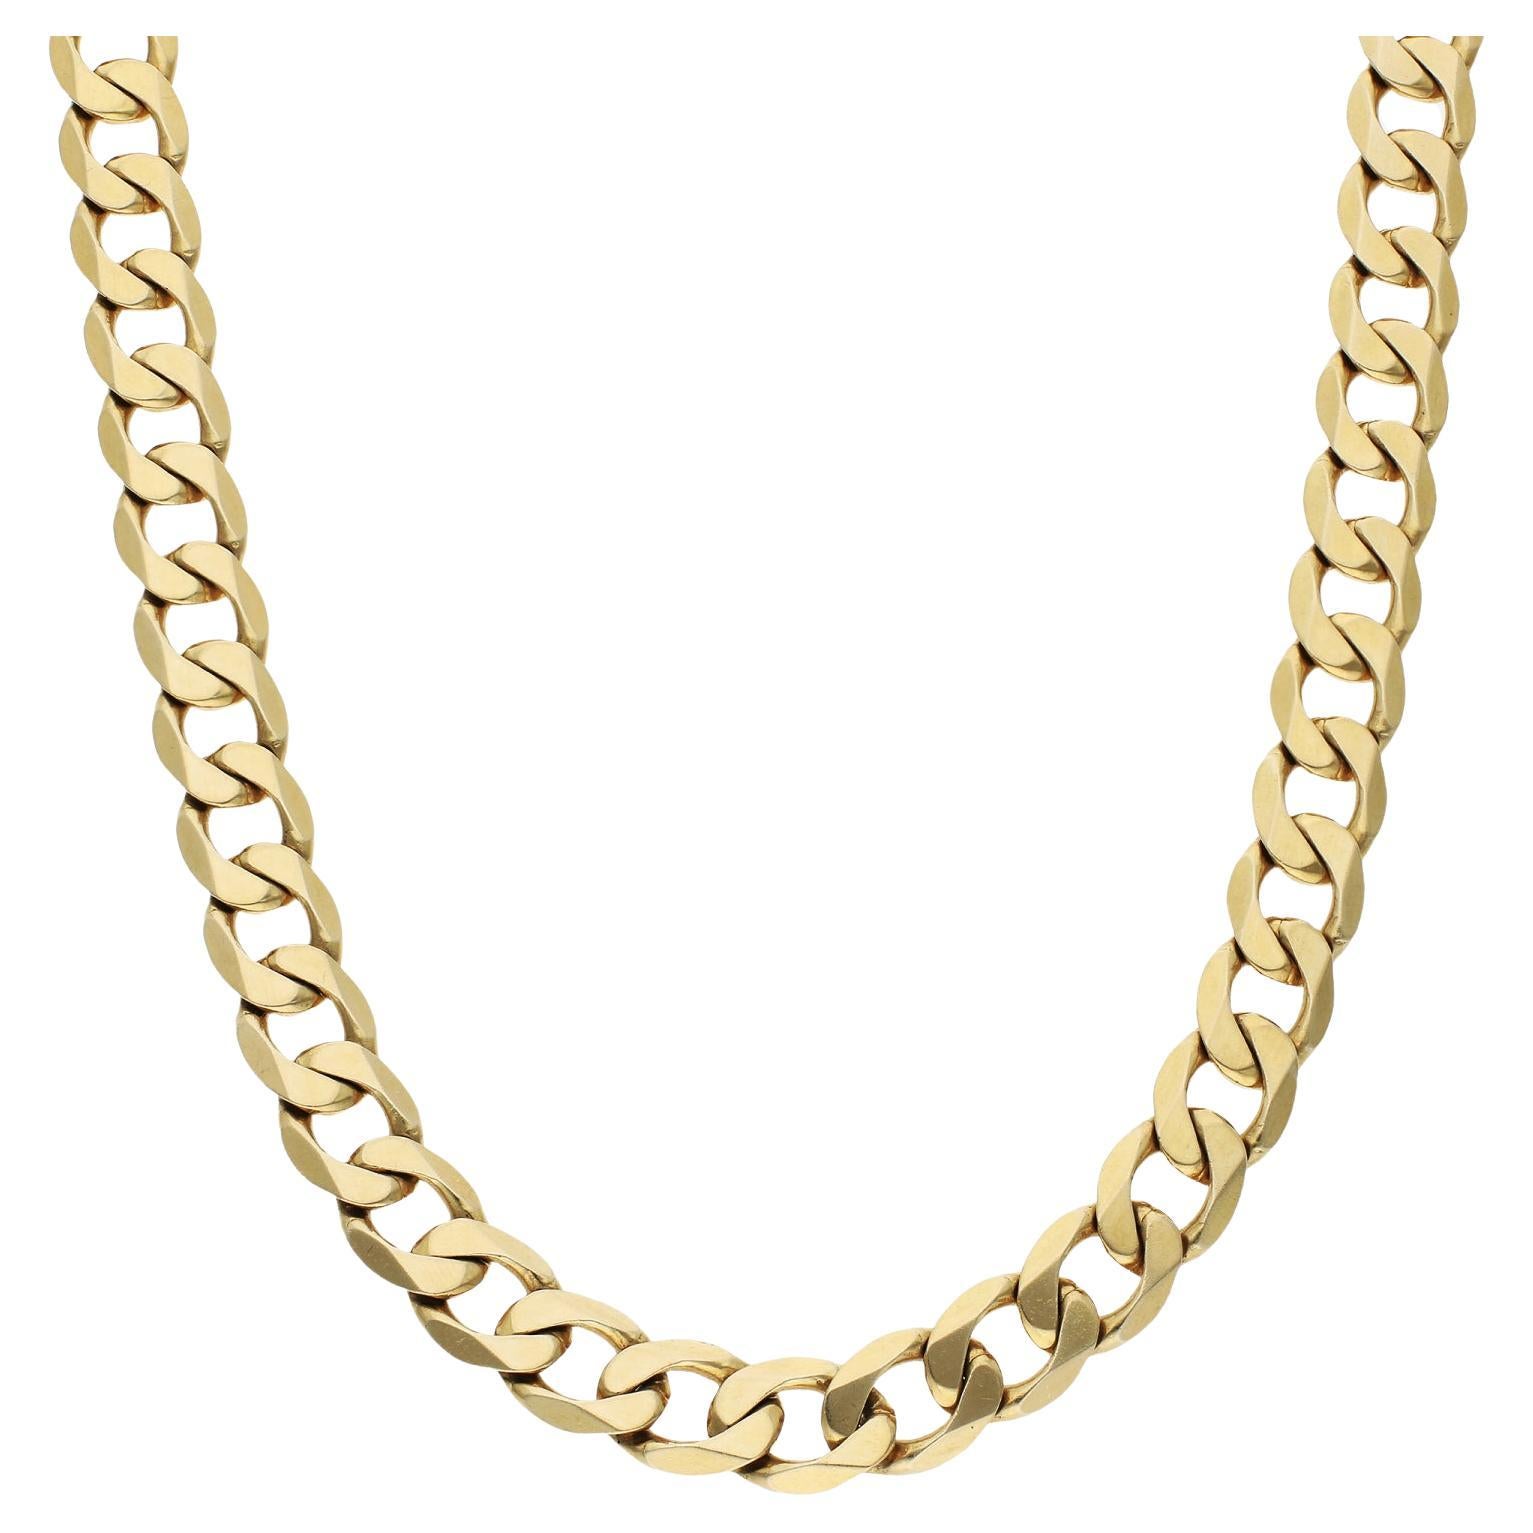 Solid 9ct Yellow Gold 19.5 Inch Metric Curb Chain Necklace - 57.90 Grams 